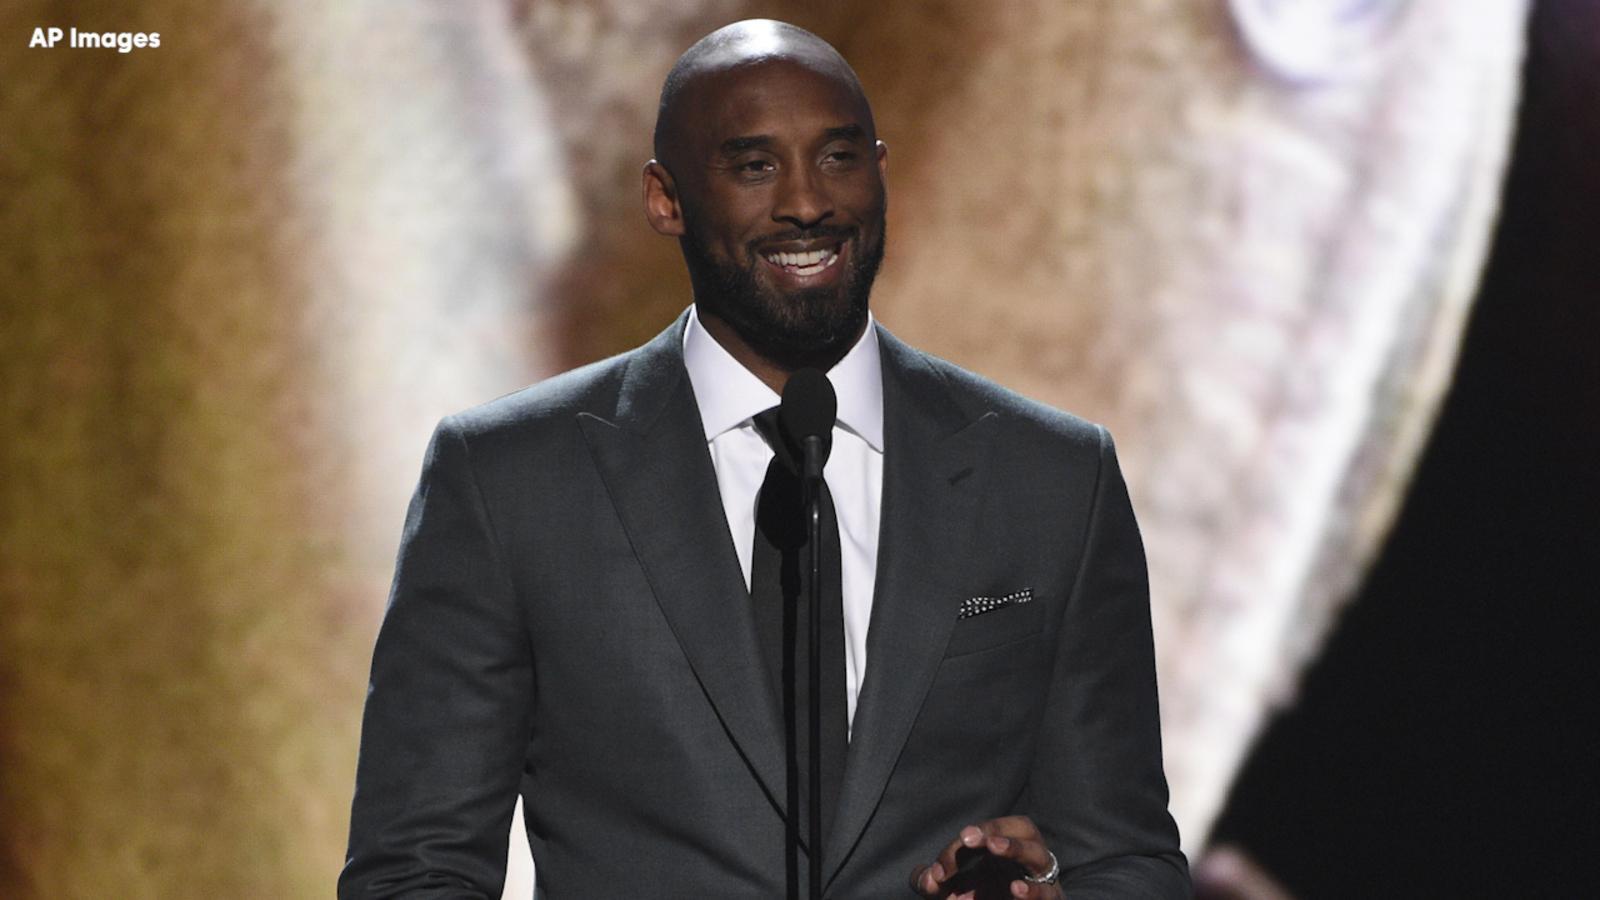 Kobe Bryant dies in helicopter crash, local figures react to